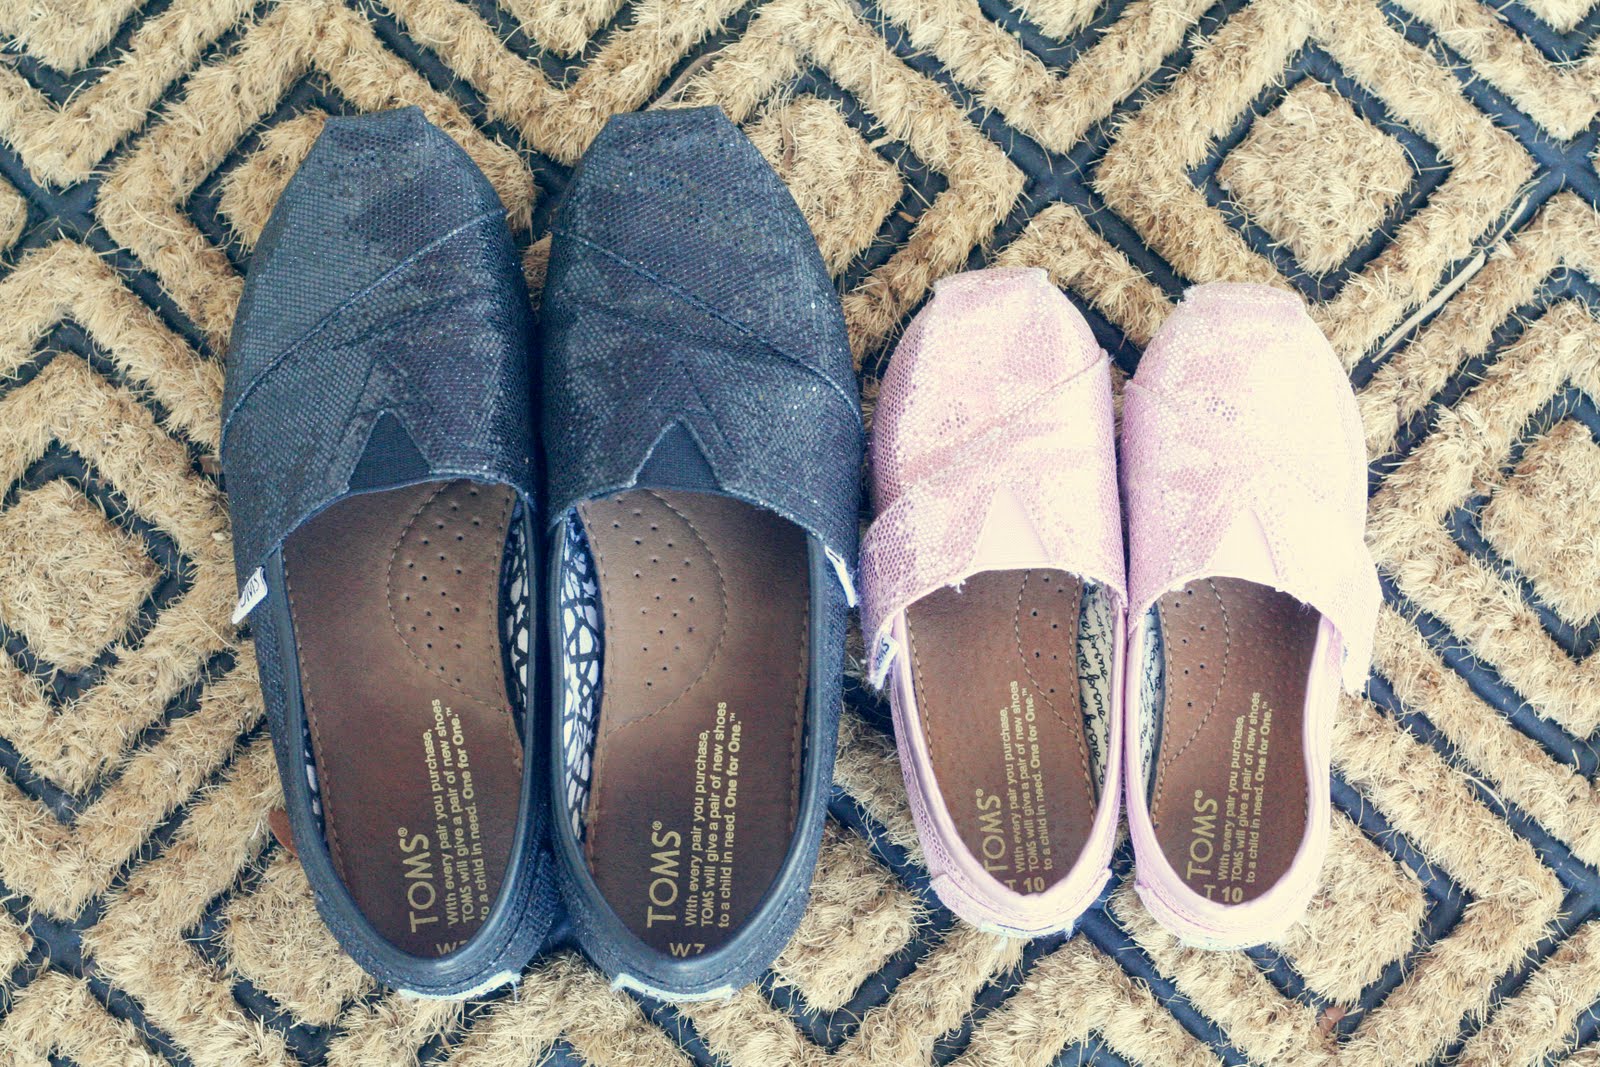 Buggie and Jellybean: One Day Without Shoes {With a Toms Shoes Giveaway}